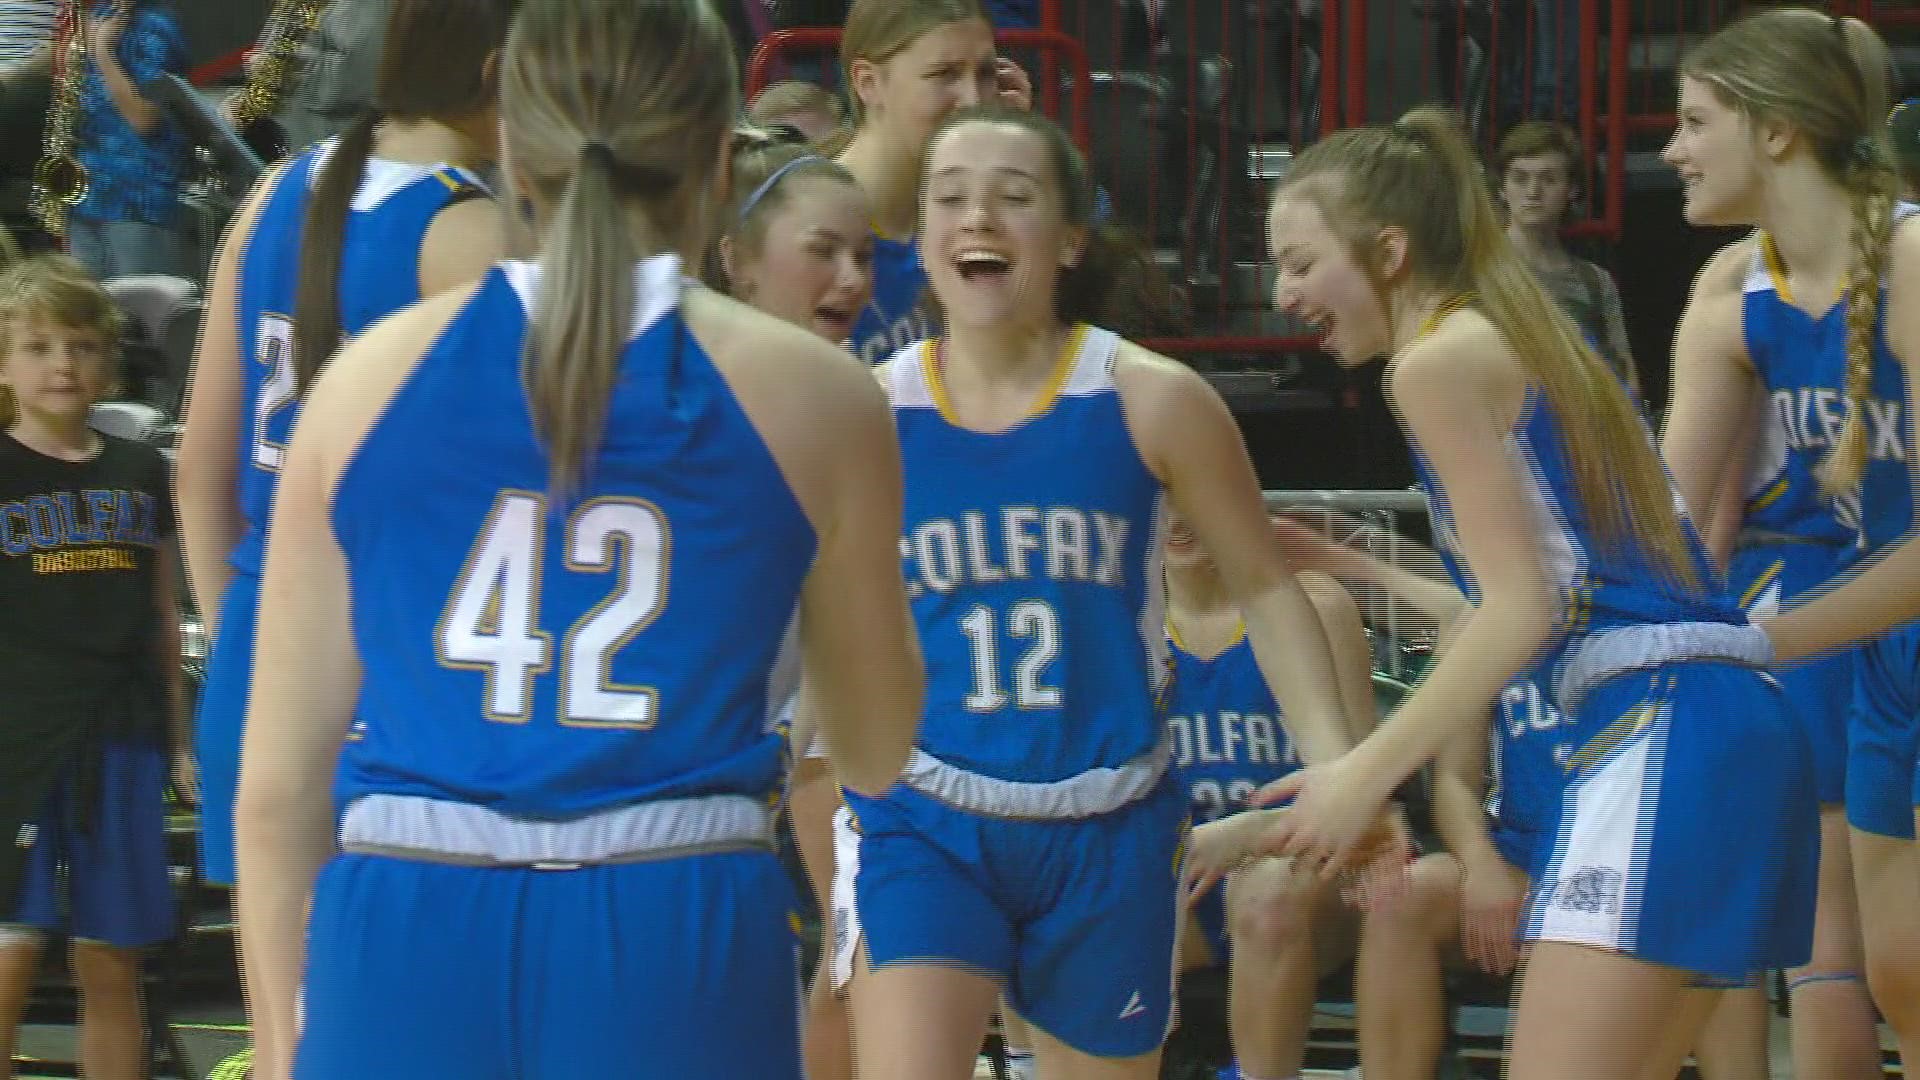 Watch highlights from the Washington State 2B basketball tournament game between #3 Colfax and 	#7 Liberty. Colfax won the game 74-49.